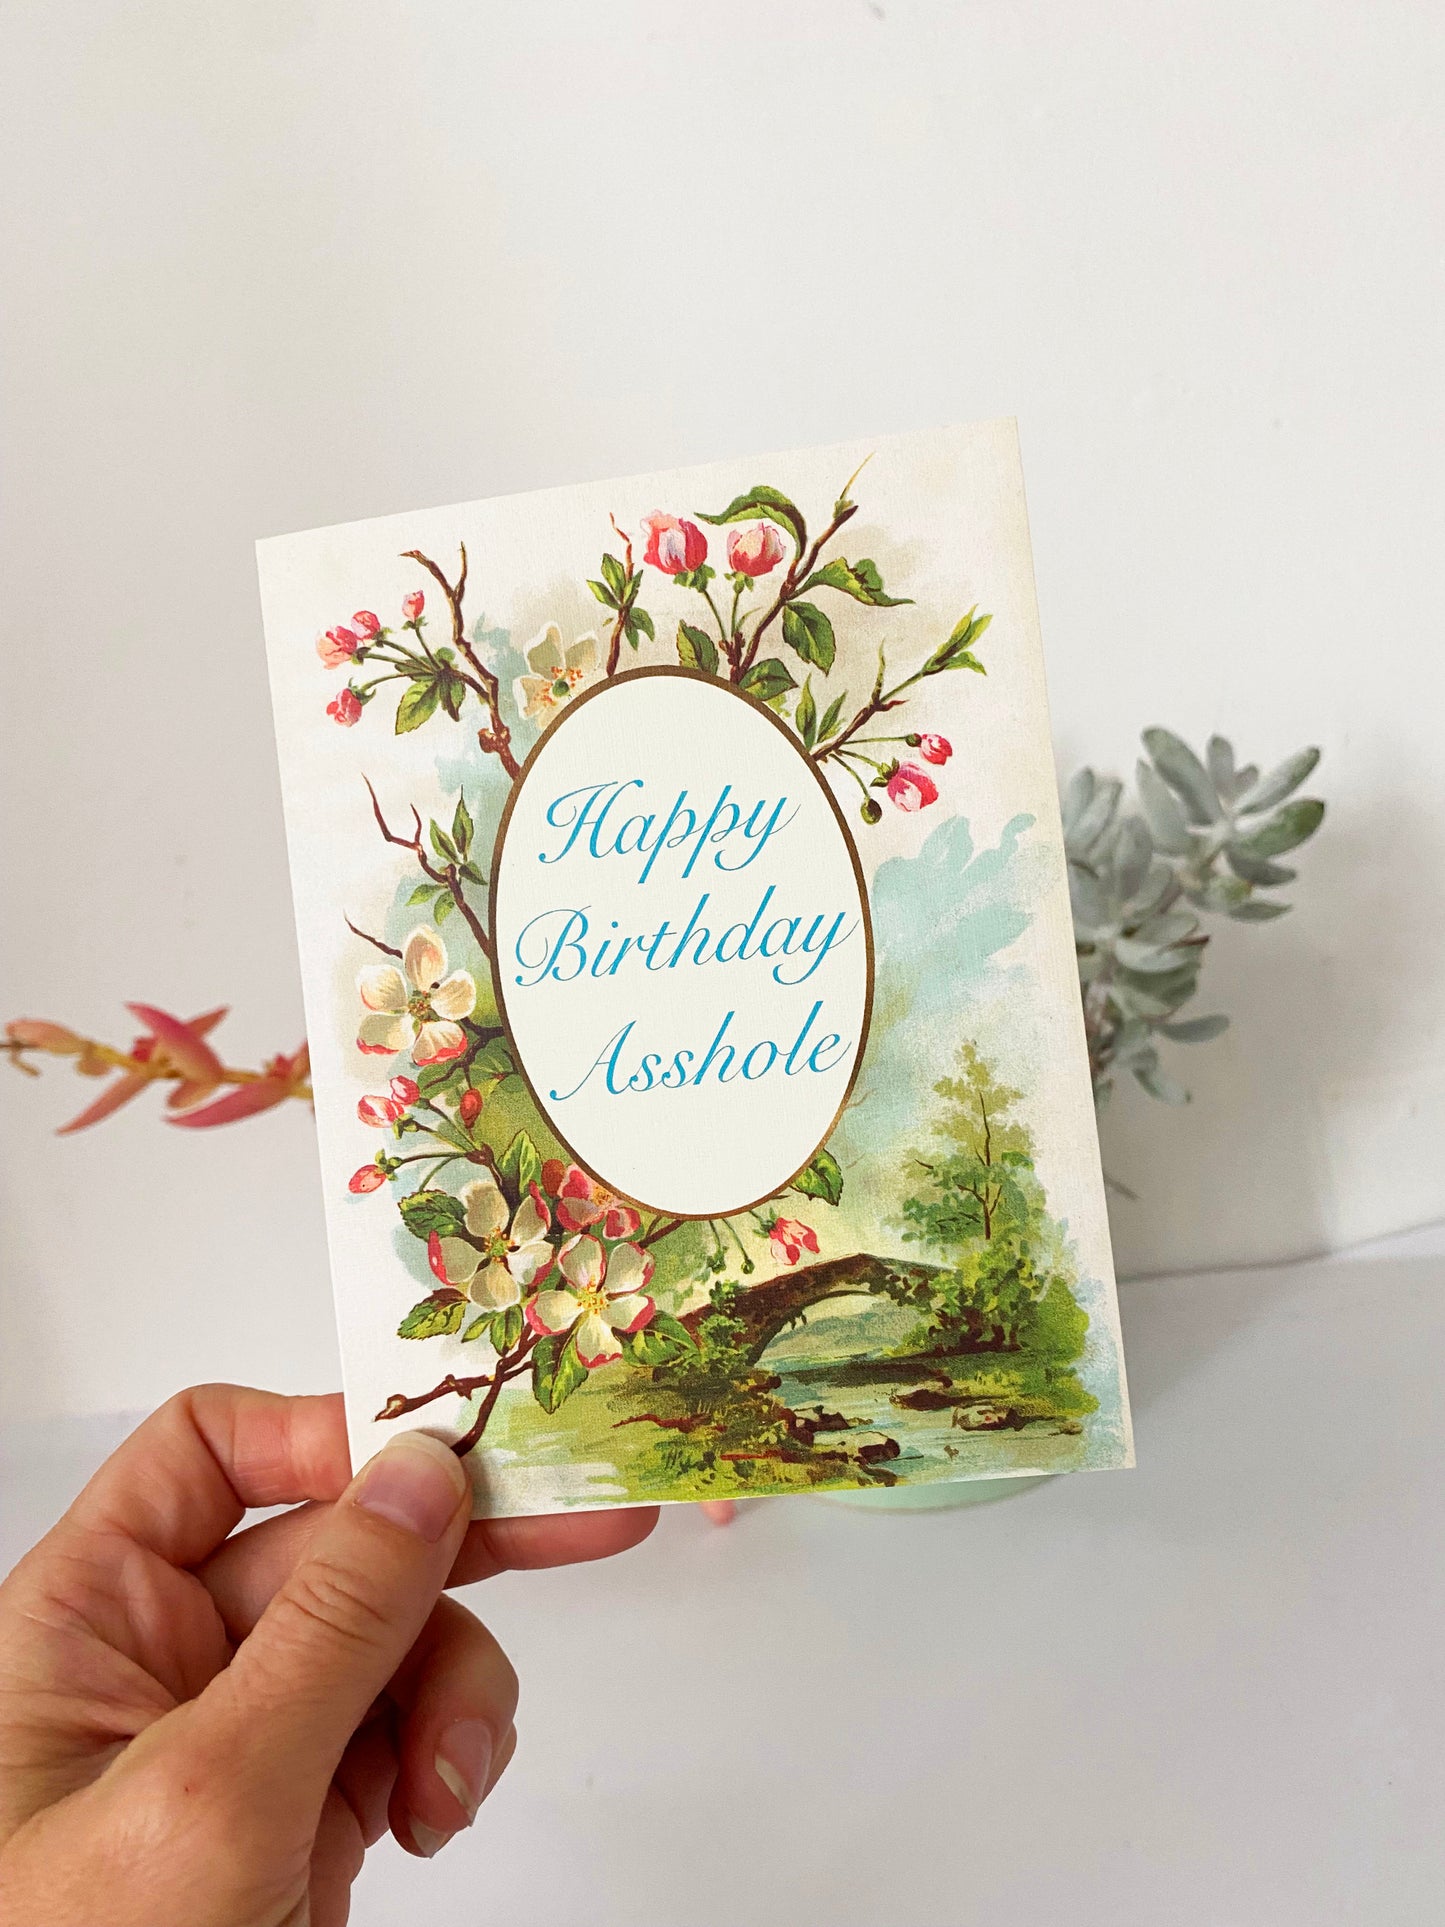 irthday card funny swear words retro vintage style text reads happy birthday asshole on front blank inside garden flowers pink white cream green blue pretty quaint natural scene water bridge coin laundry